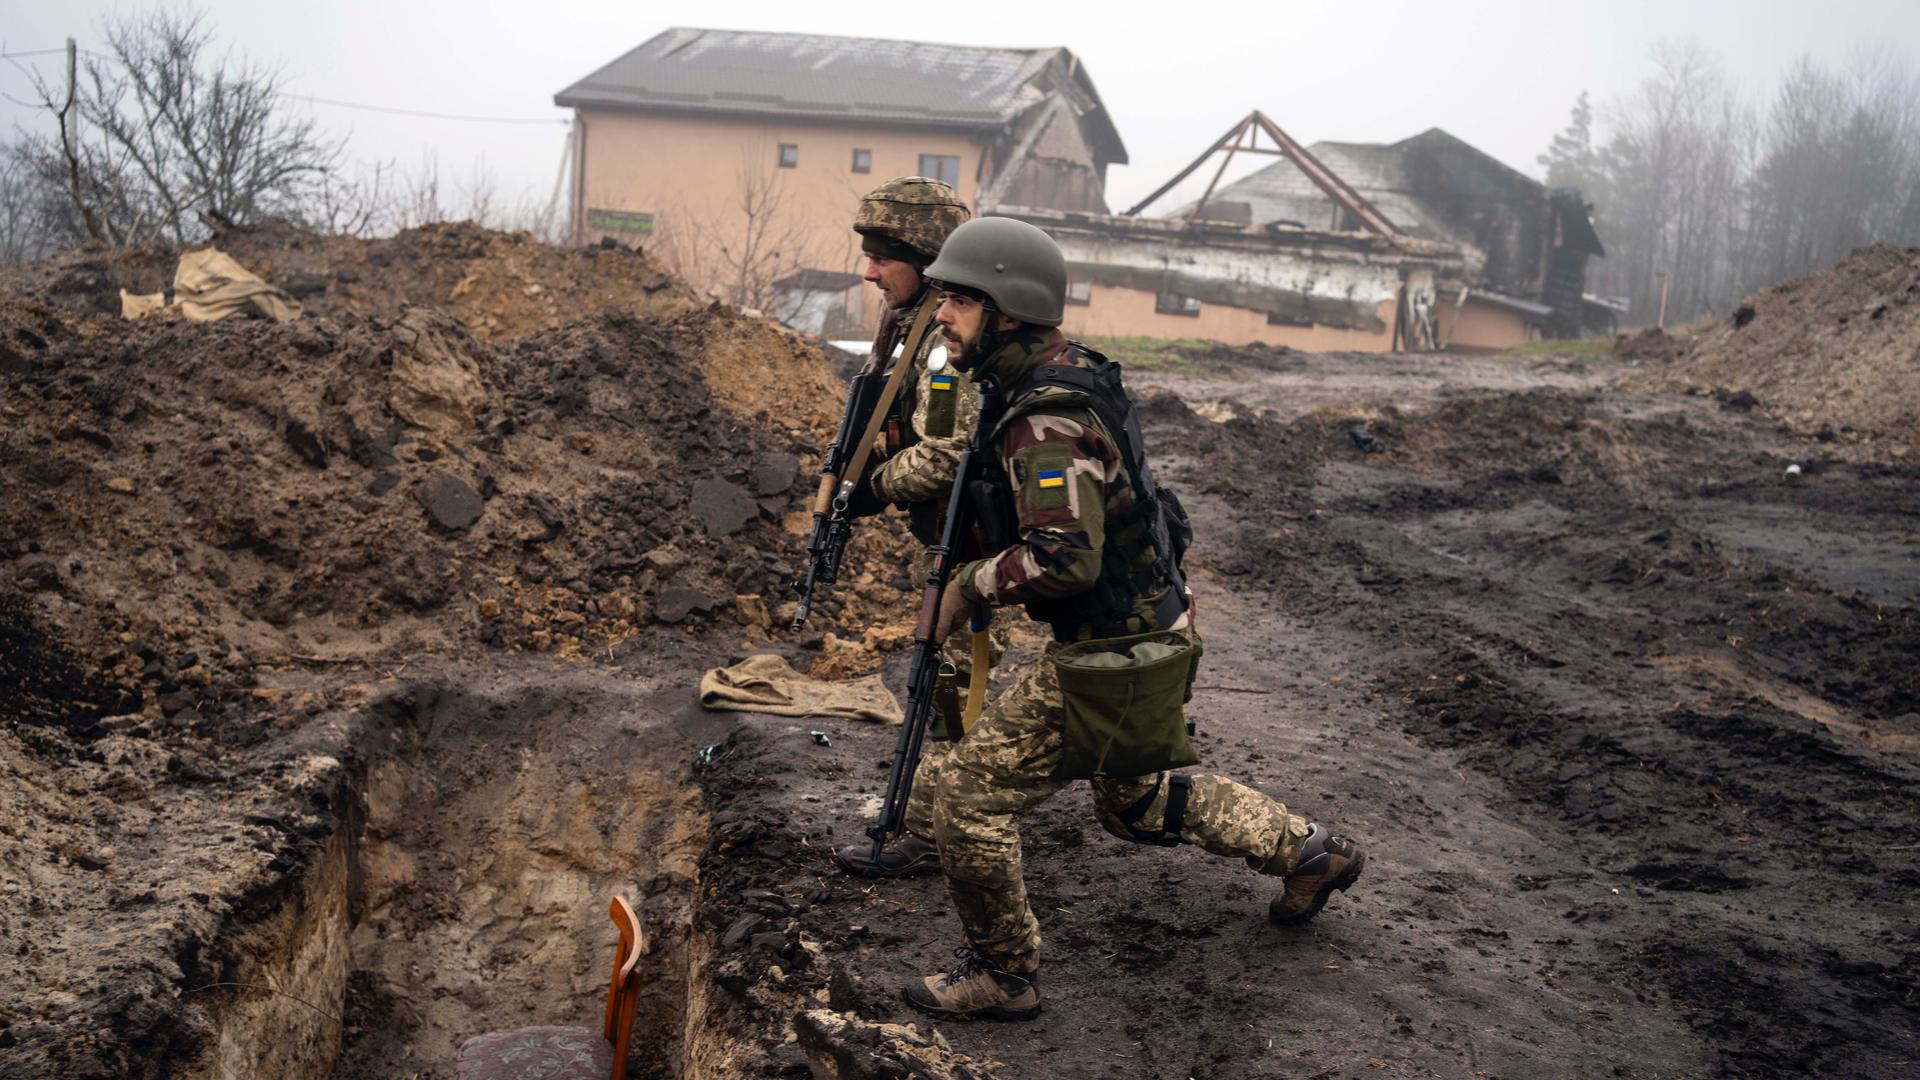 Ukrainian soldiers inspect trenches used by Russian soldiers during the occupation of villages on the outskirts of Kyiv, Ukraine, April 1, 2022. 